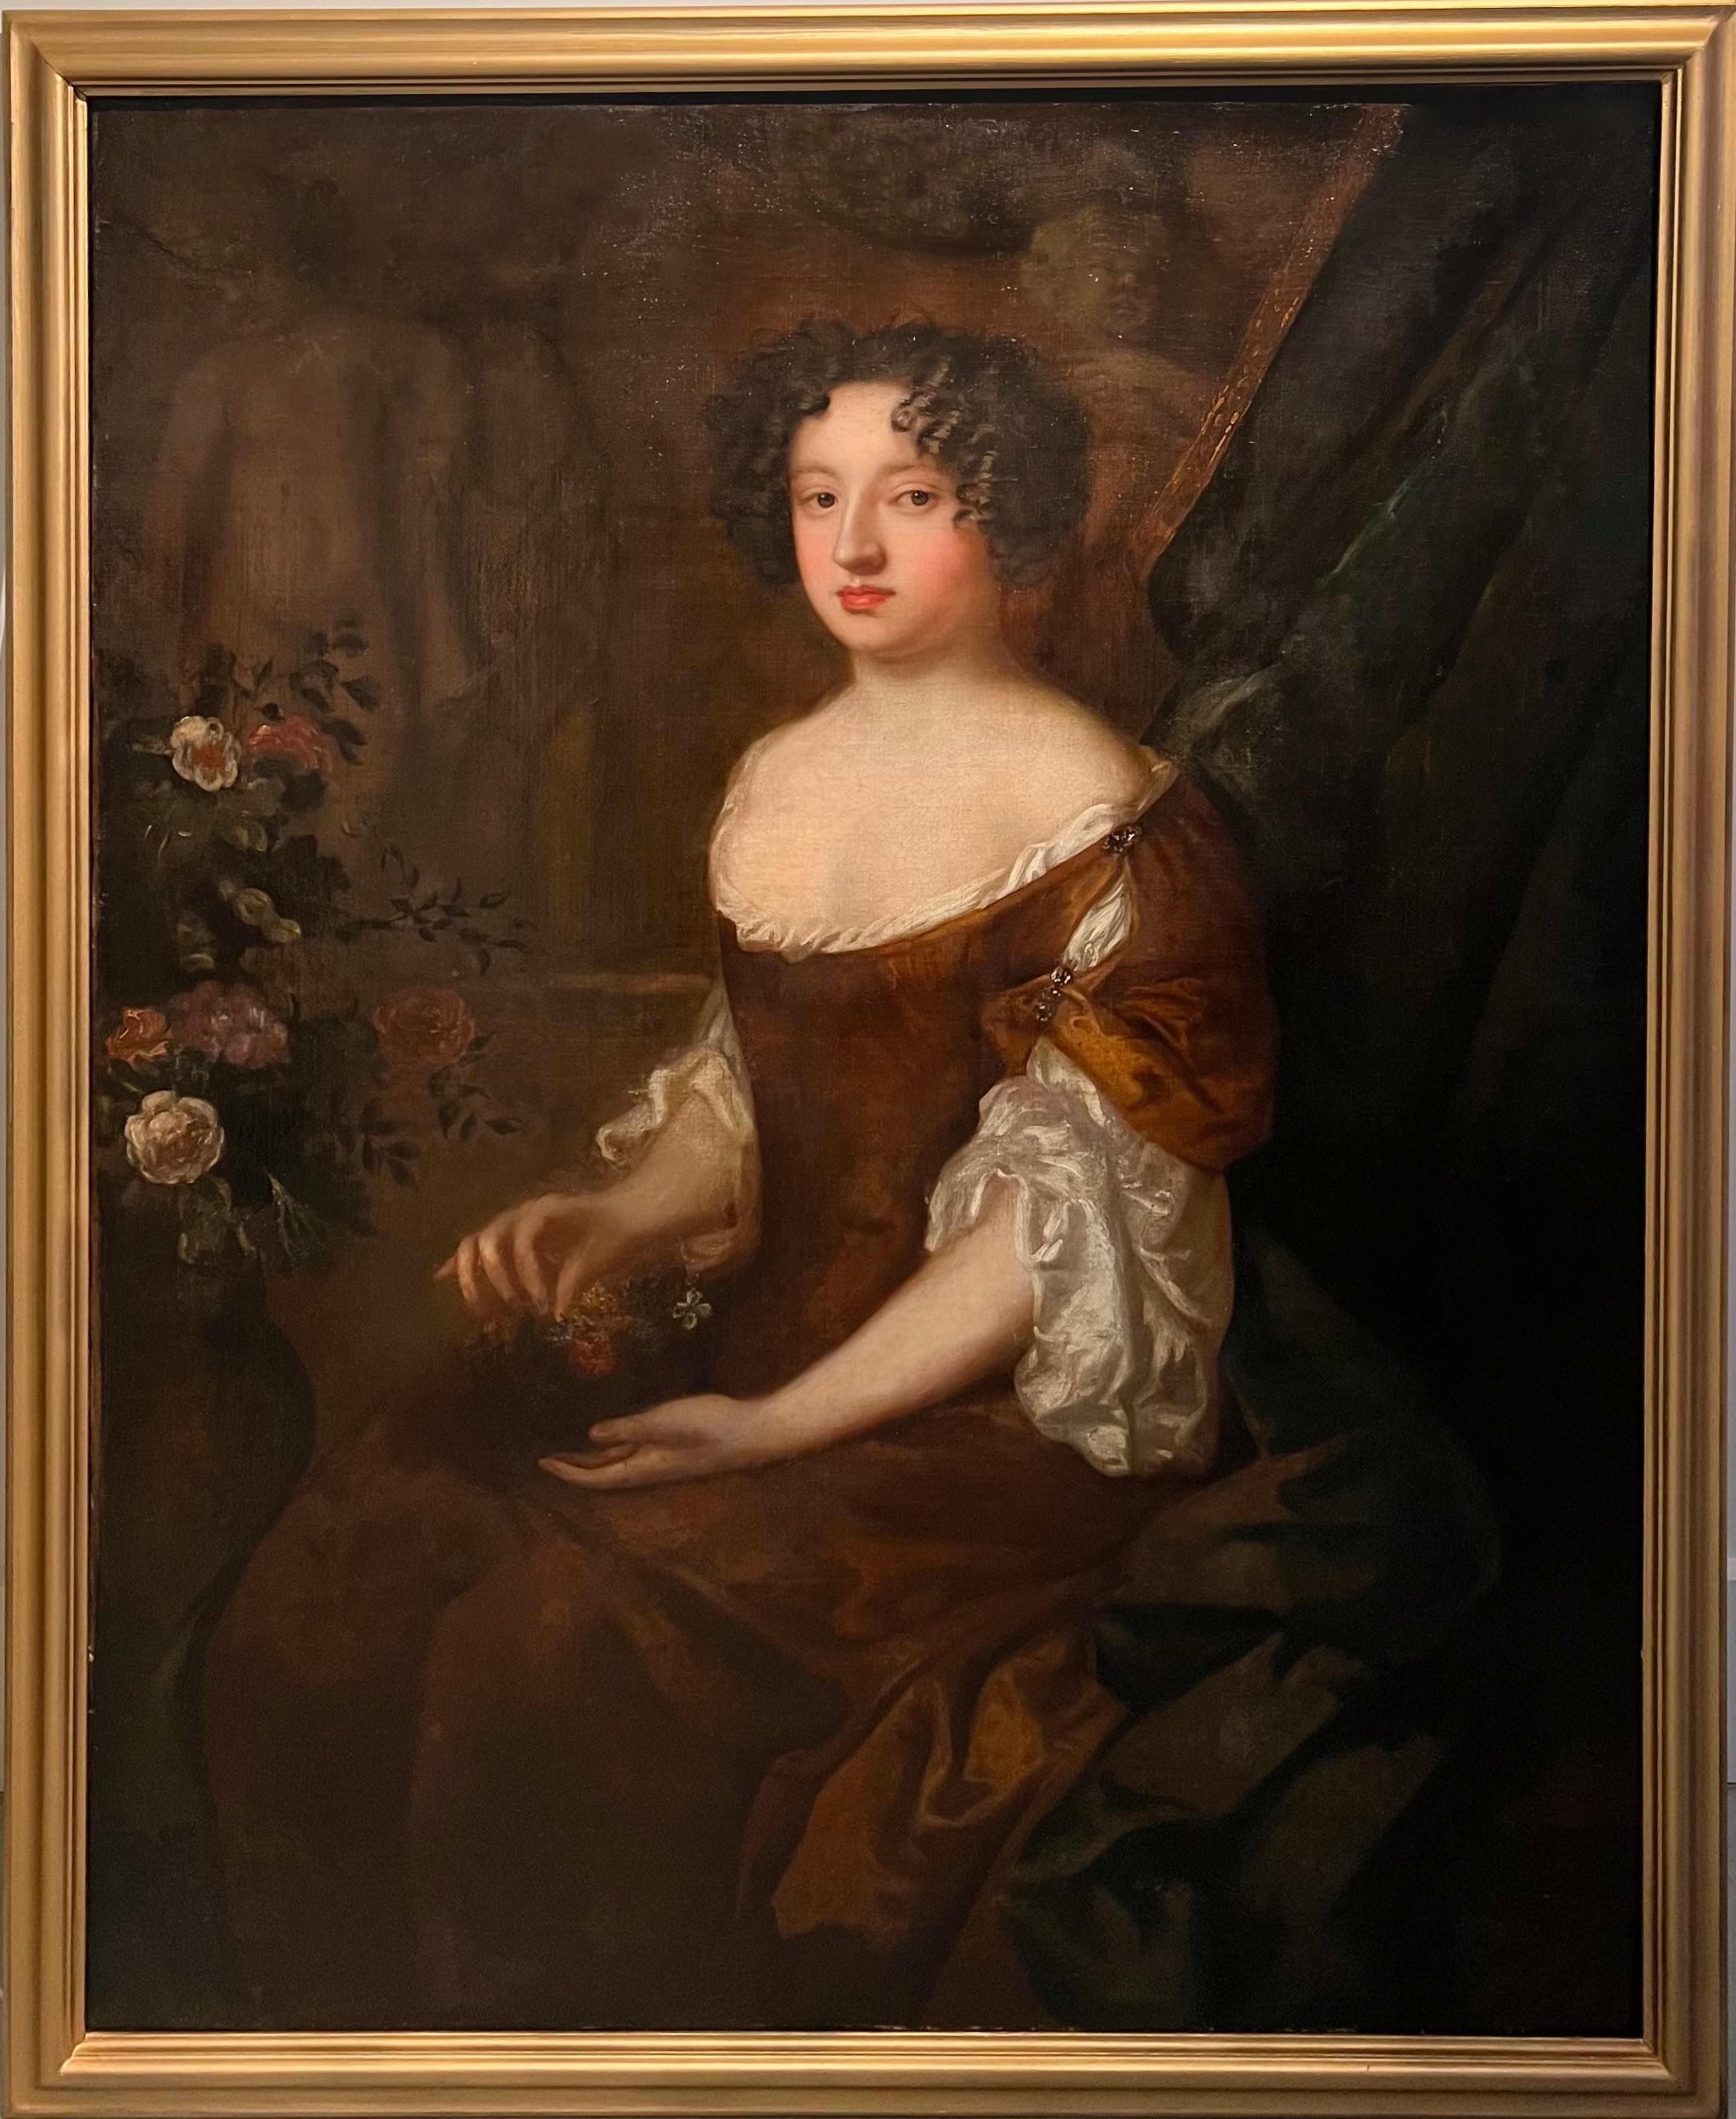 Sir Godfrey Kneller Figurative Painting - Large 17th century Portrait of a noble lady - Castle Caufeild - Godfrey Kneller